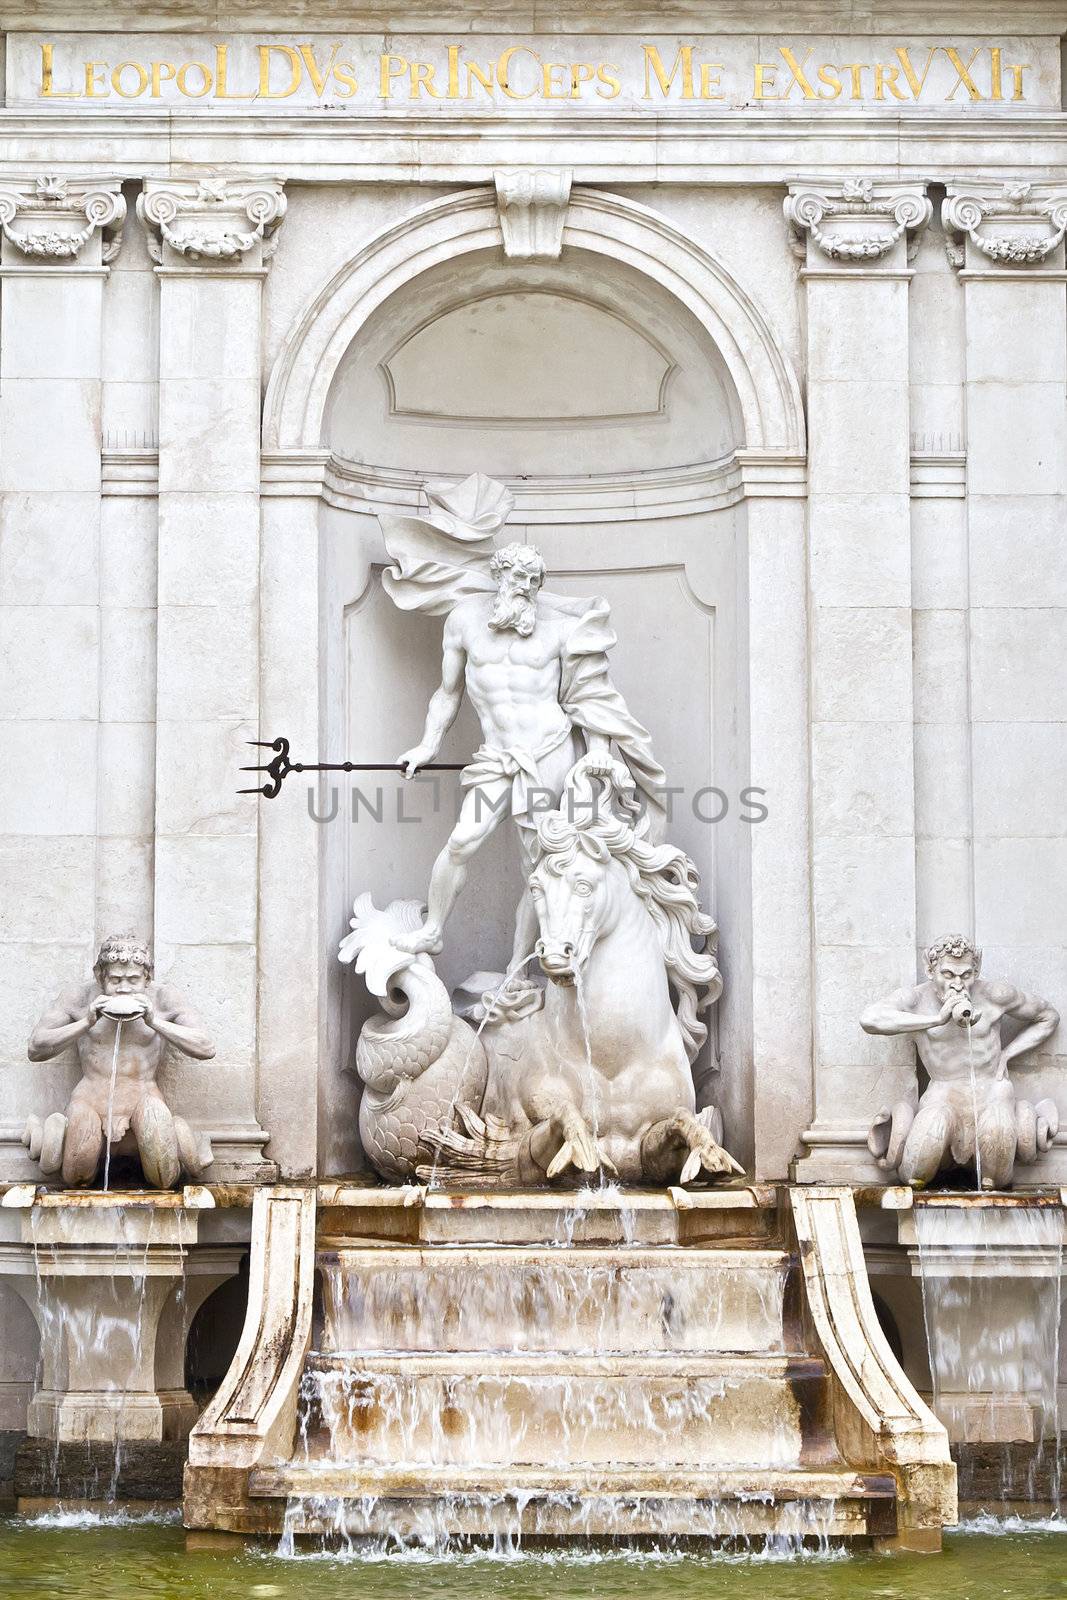 An image of a nice fountain in Salzburg